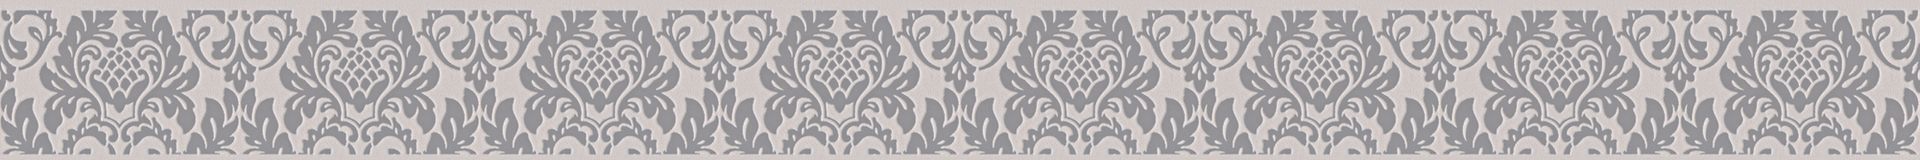 A.S. Création Only Borders 10, Barock Tapete, braun, beige 303892